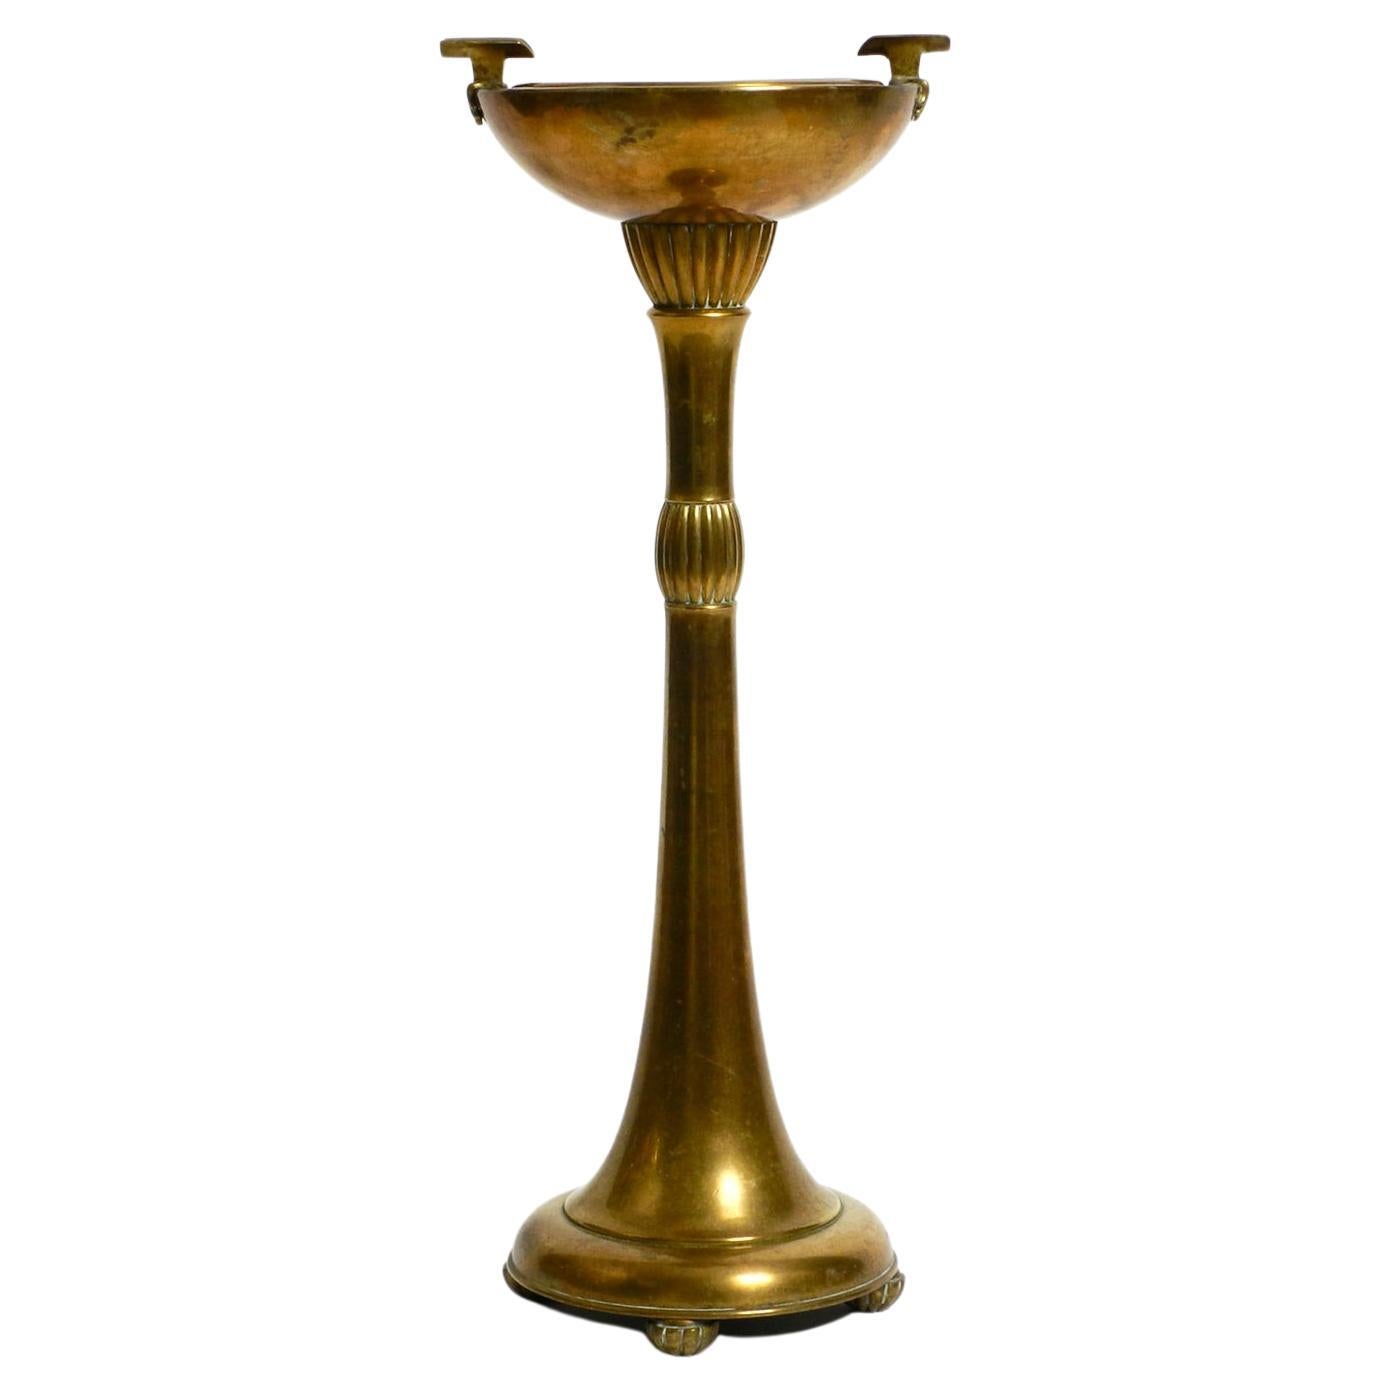 Beautiful, Large, Heavy Art Nouveau Brass Standing Ashtray from Around 1900